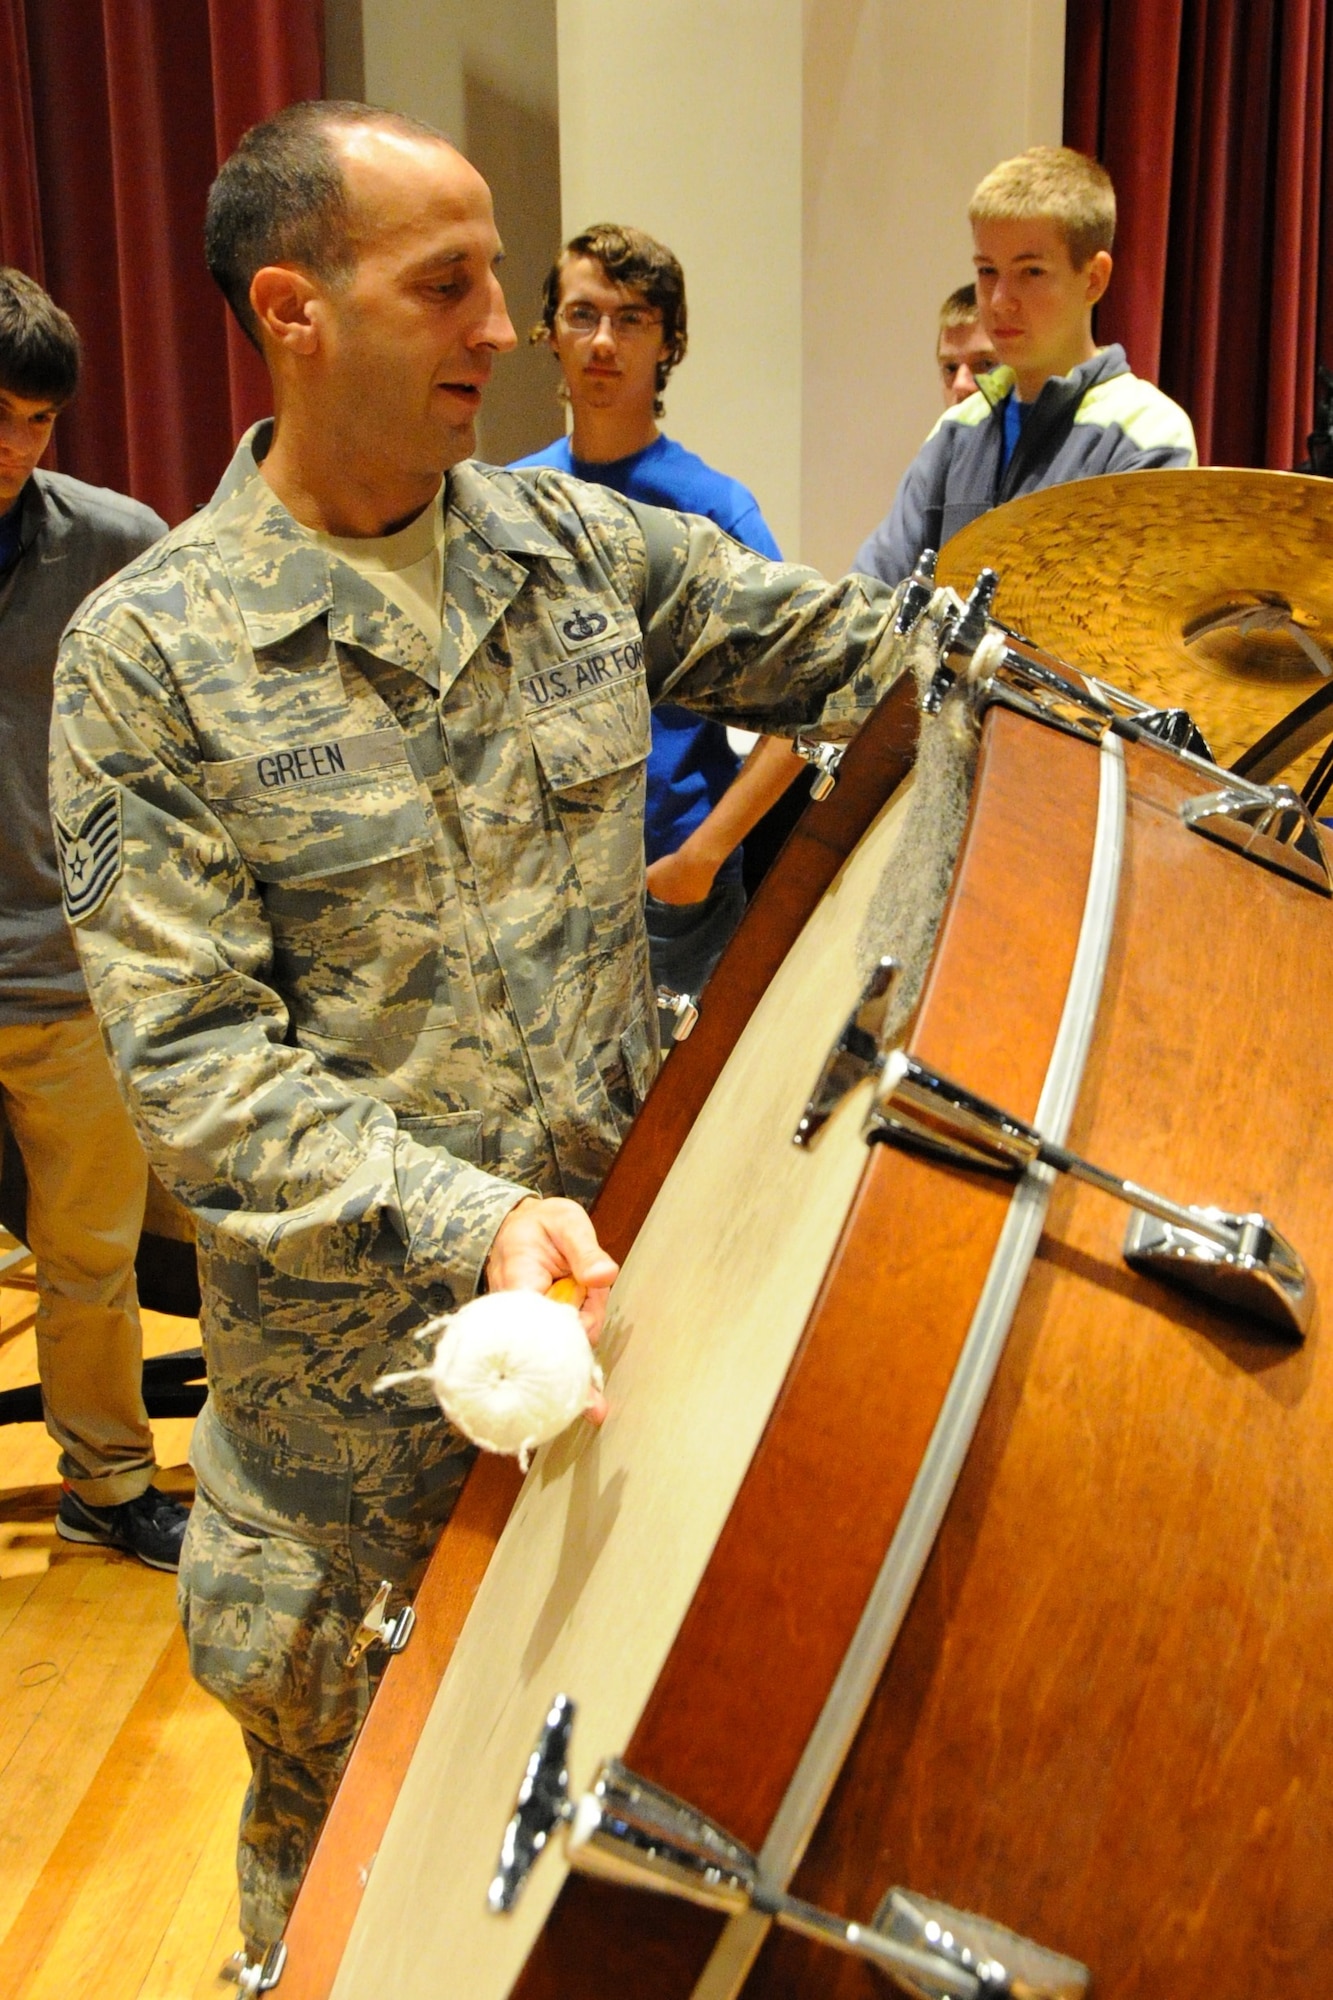 U.S. Air Force Concert Band percussionist Technical Sgt. Adam Green demonstrates different percussion methods to students from Duke University during a Masterclass session at Joint Base Anacostia-Bolling, Washington D.C., Oct. 13, 2015. The members of Duke University’s Wind Symphony visited the U.S. Air Force Band today for an immersion in music and Air Force culture. The students attended Masterclass sessions led by performers from the Band to further develop mastery of their instruments before watching the Concert Band’s final rehearsal before their fall tour. (U.S. Air Force photo/Staff Sgt. Matt Davis)